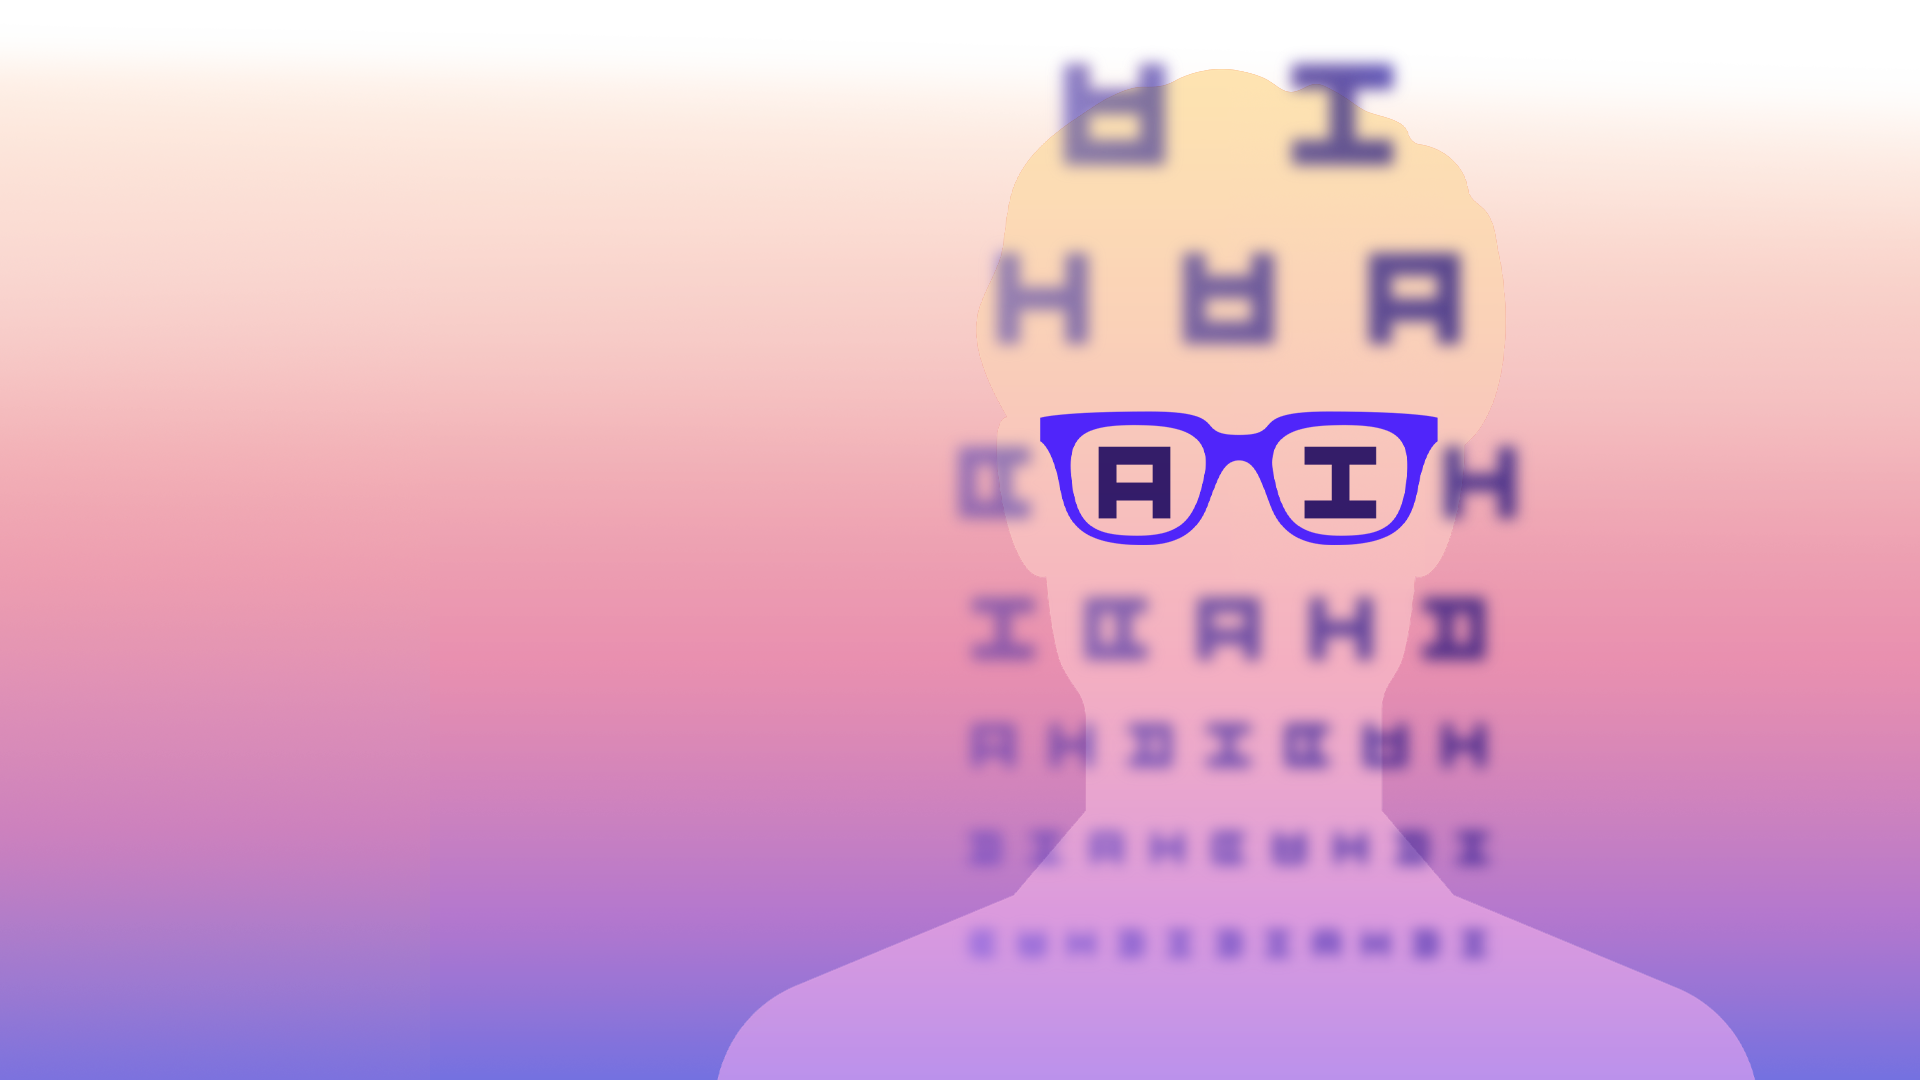 A colorful illustration of what looks like an eye-doctor chart, with a silhouette of a person wearing glasses incorporated into it. The letters, which are all “A” and “I” are blurry, except for the letters within the person’s glasses—A I—which are in focus.